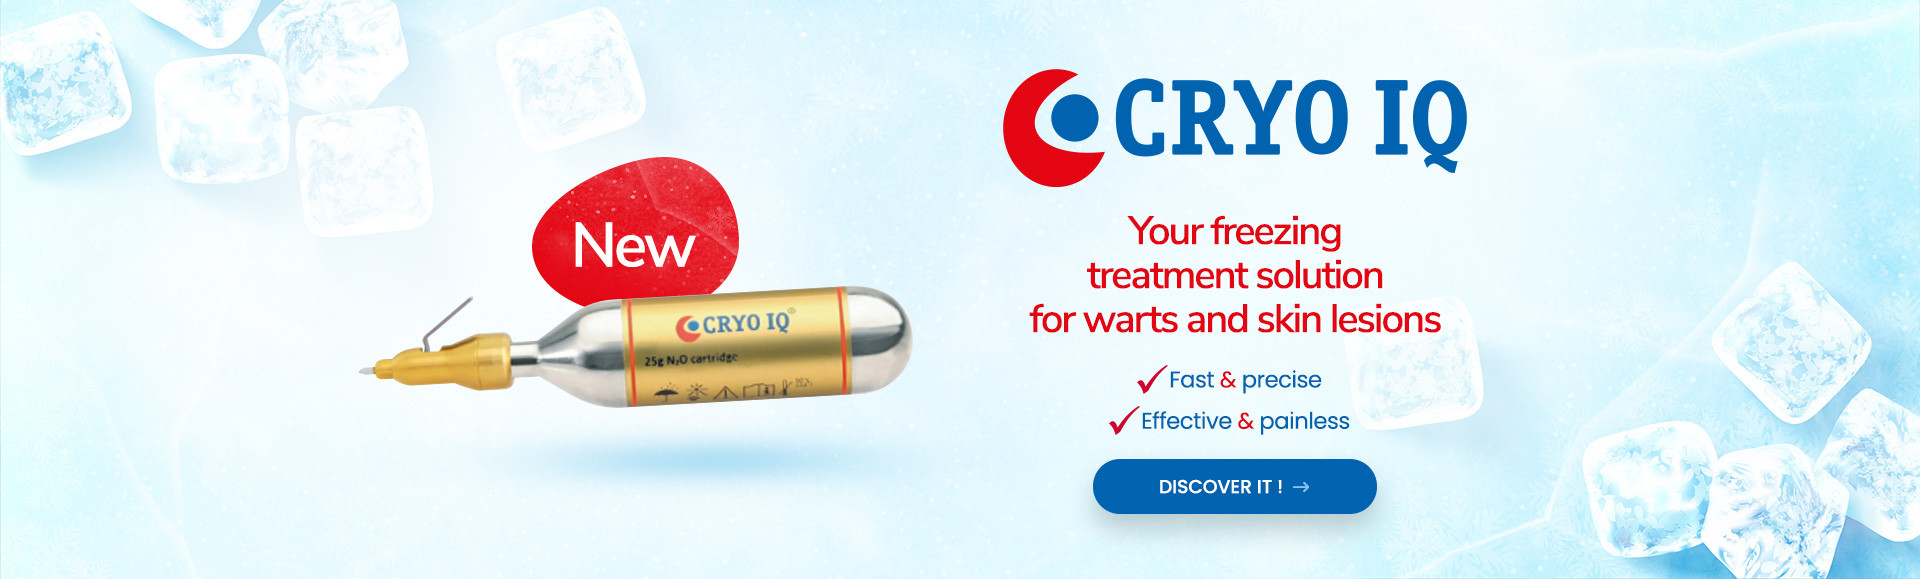 CryoIQ introductory offer at €270!